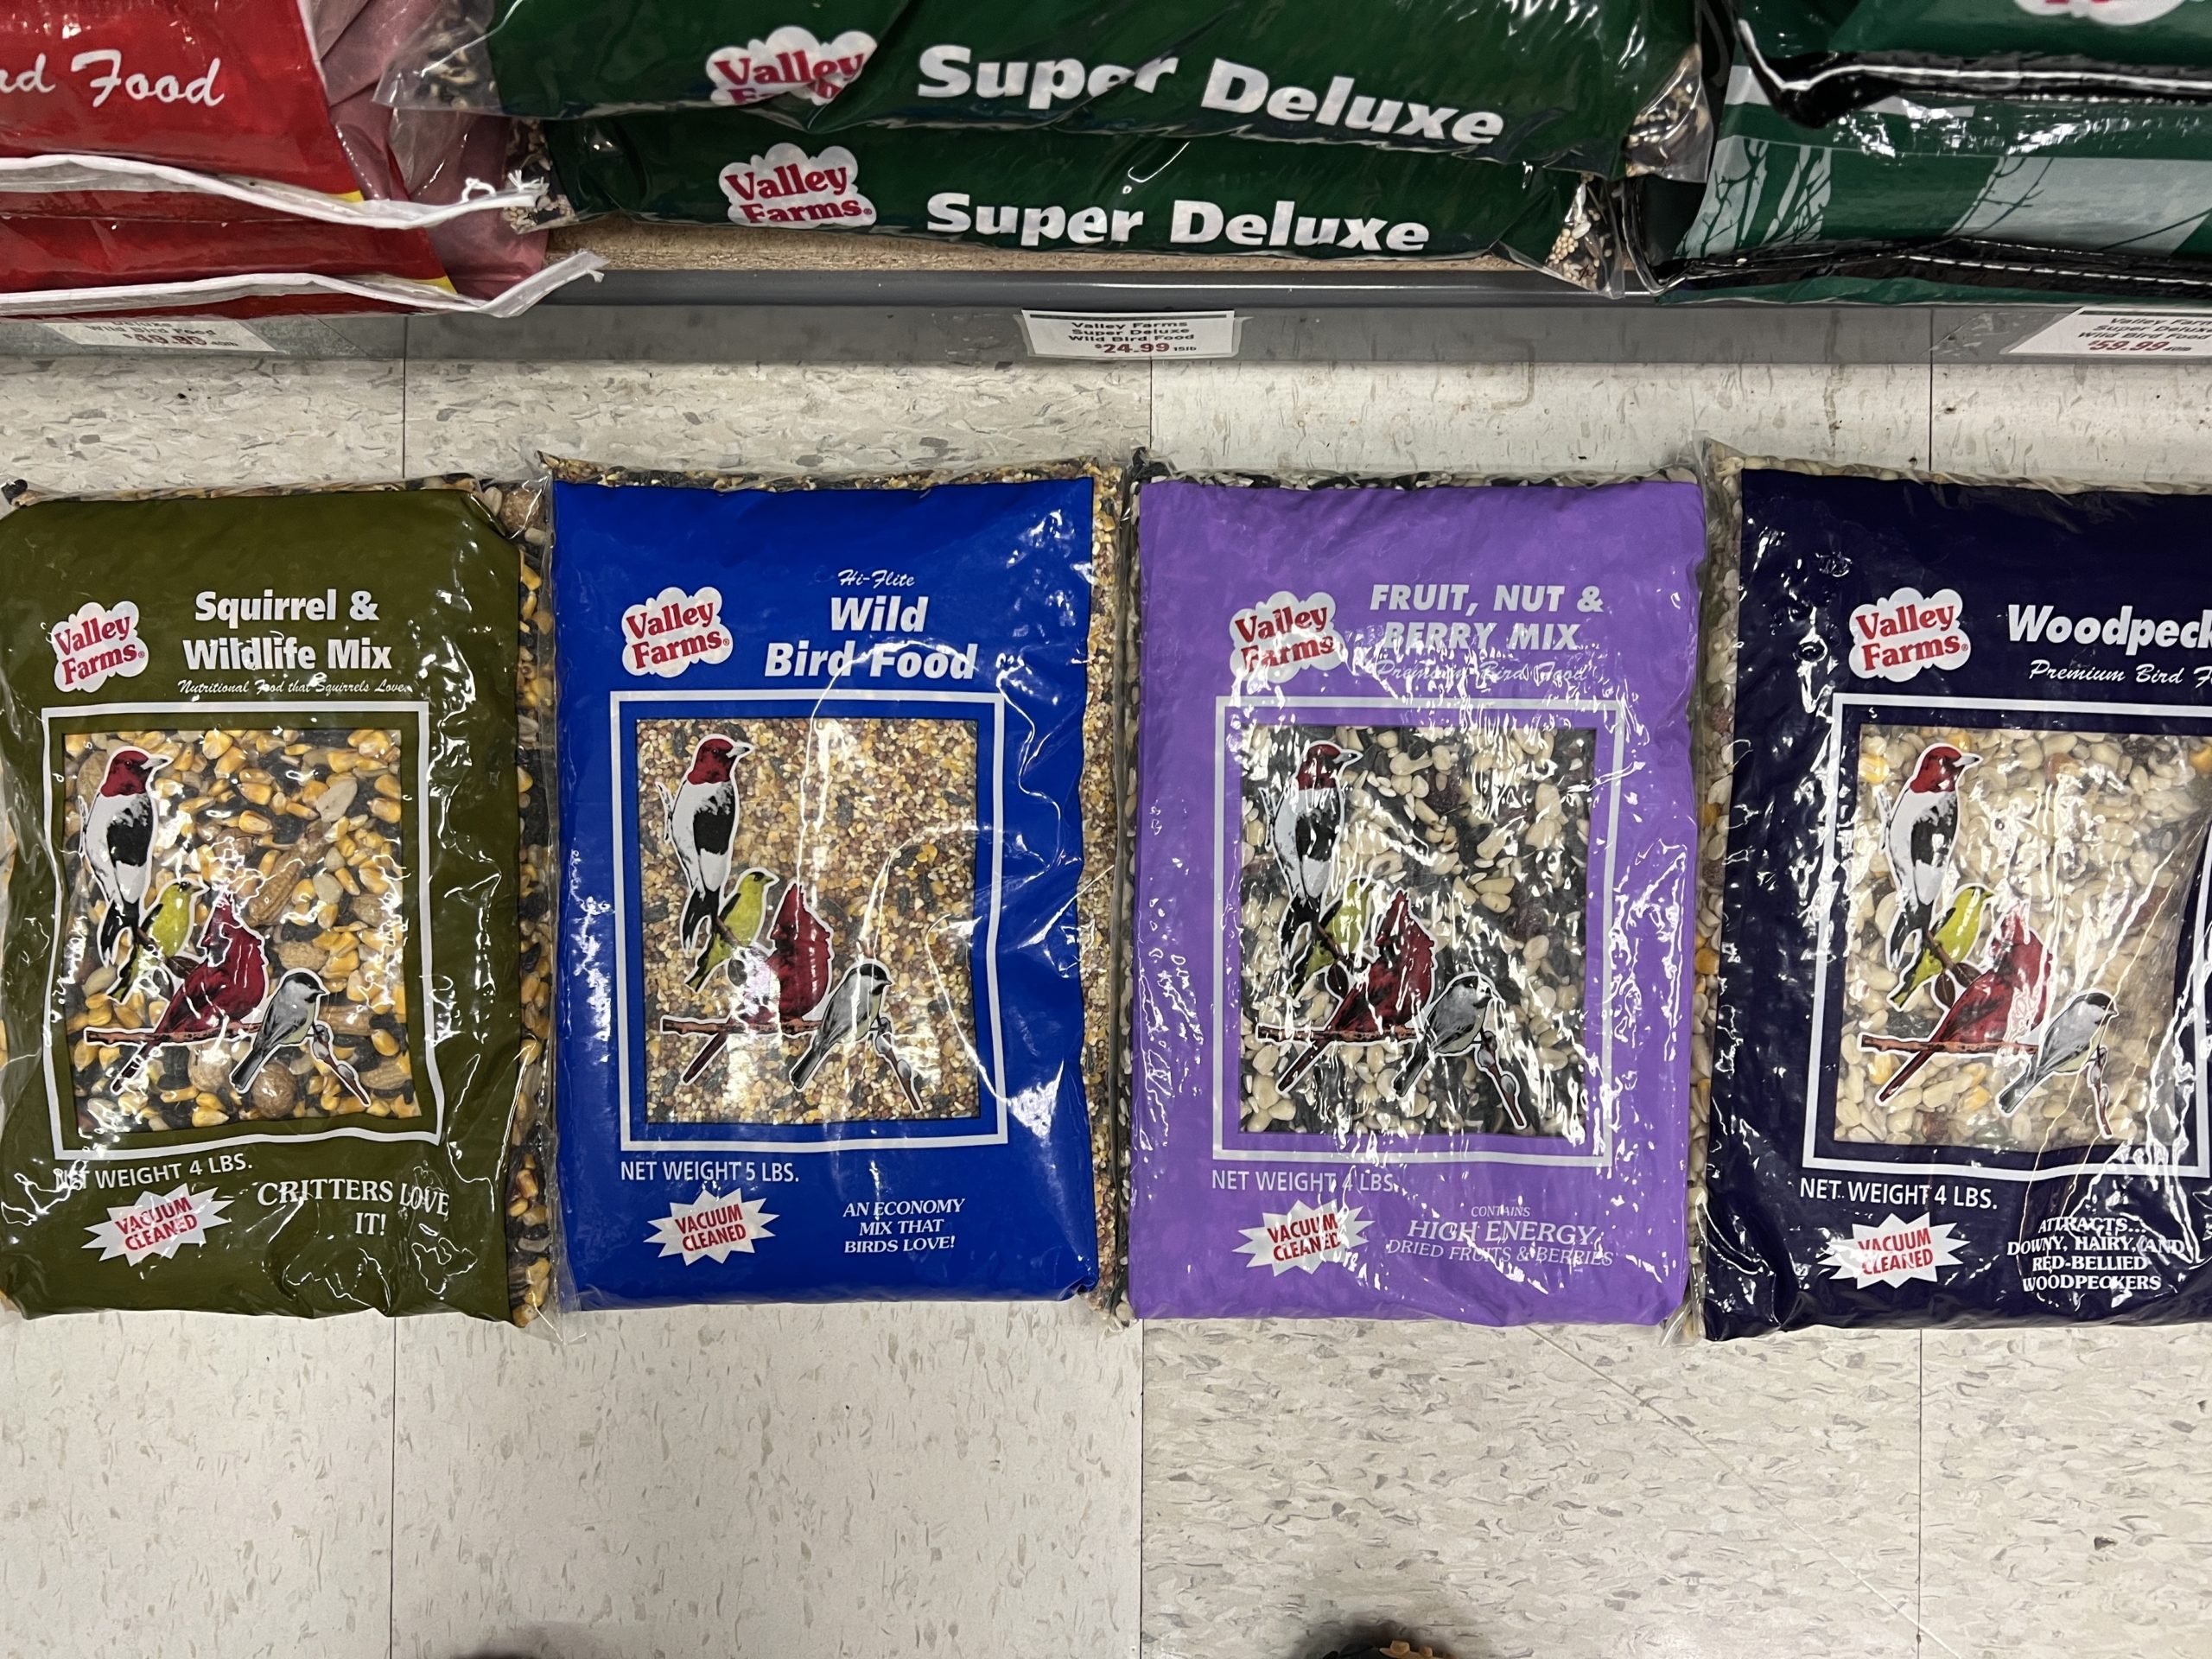 There can be 10 or more choices when shopping for bird seed. Some, like the one on the left, are best for ground feeding, while other mixes are designed to attract certain types or varieties of birds.